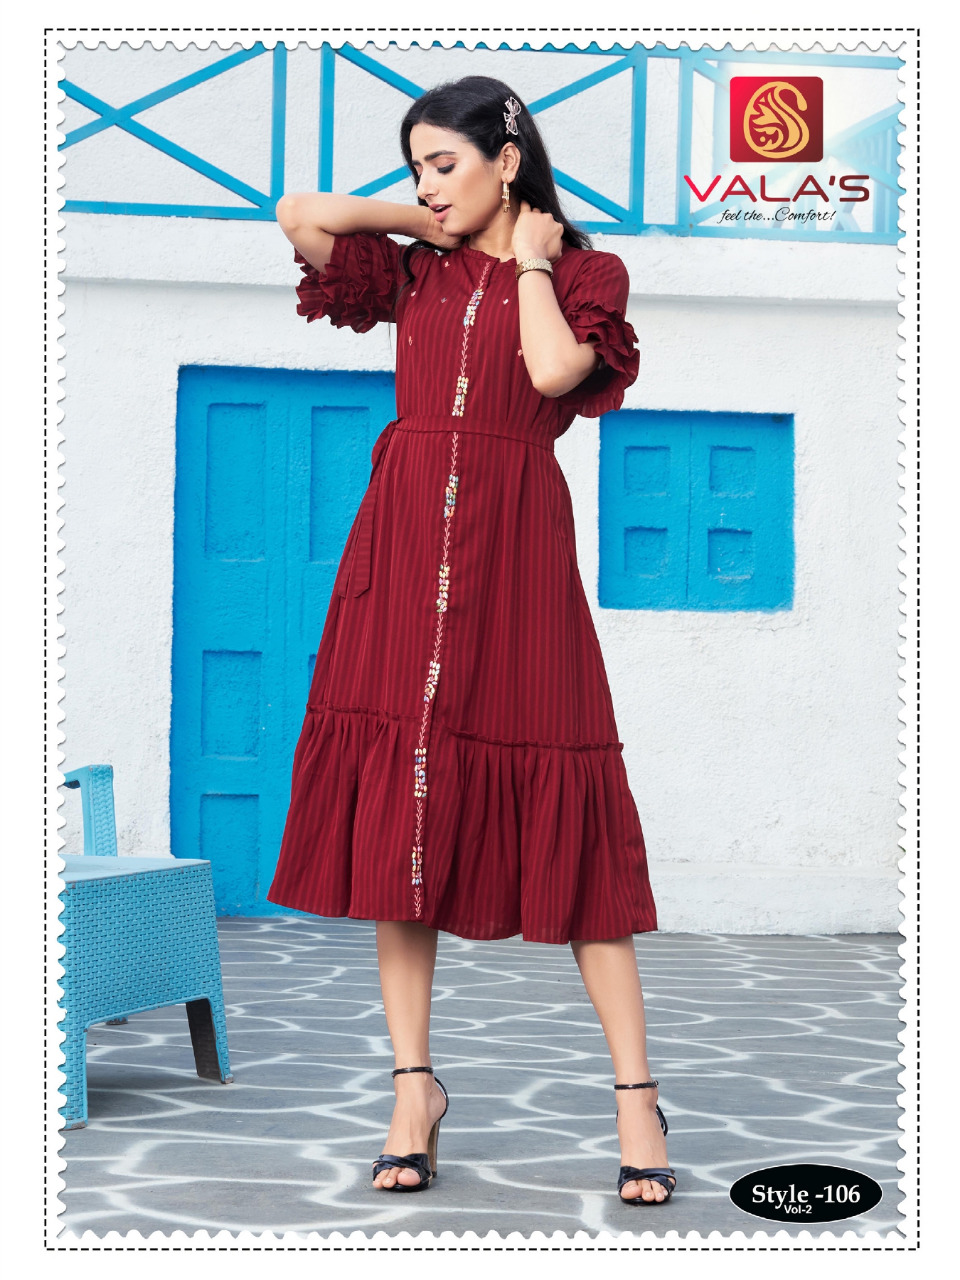 Valas Style vol 2 collection 5